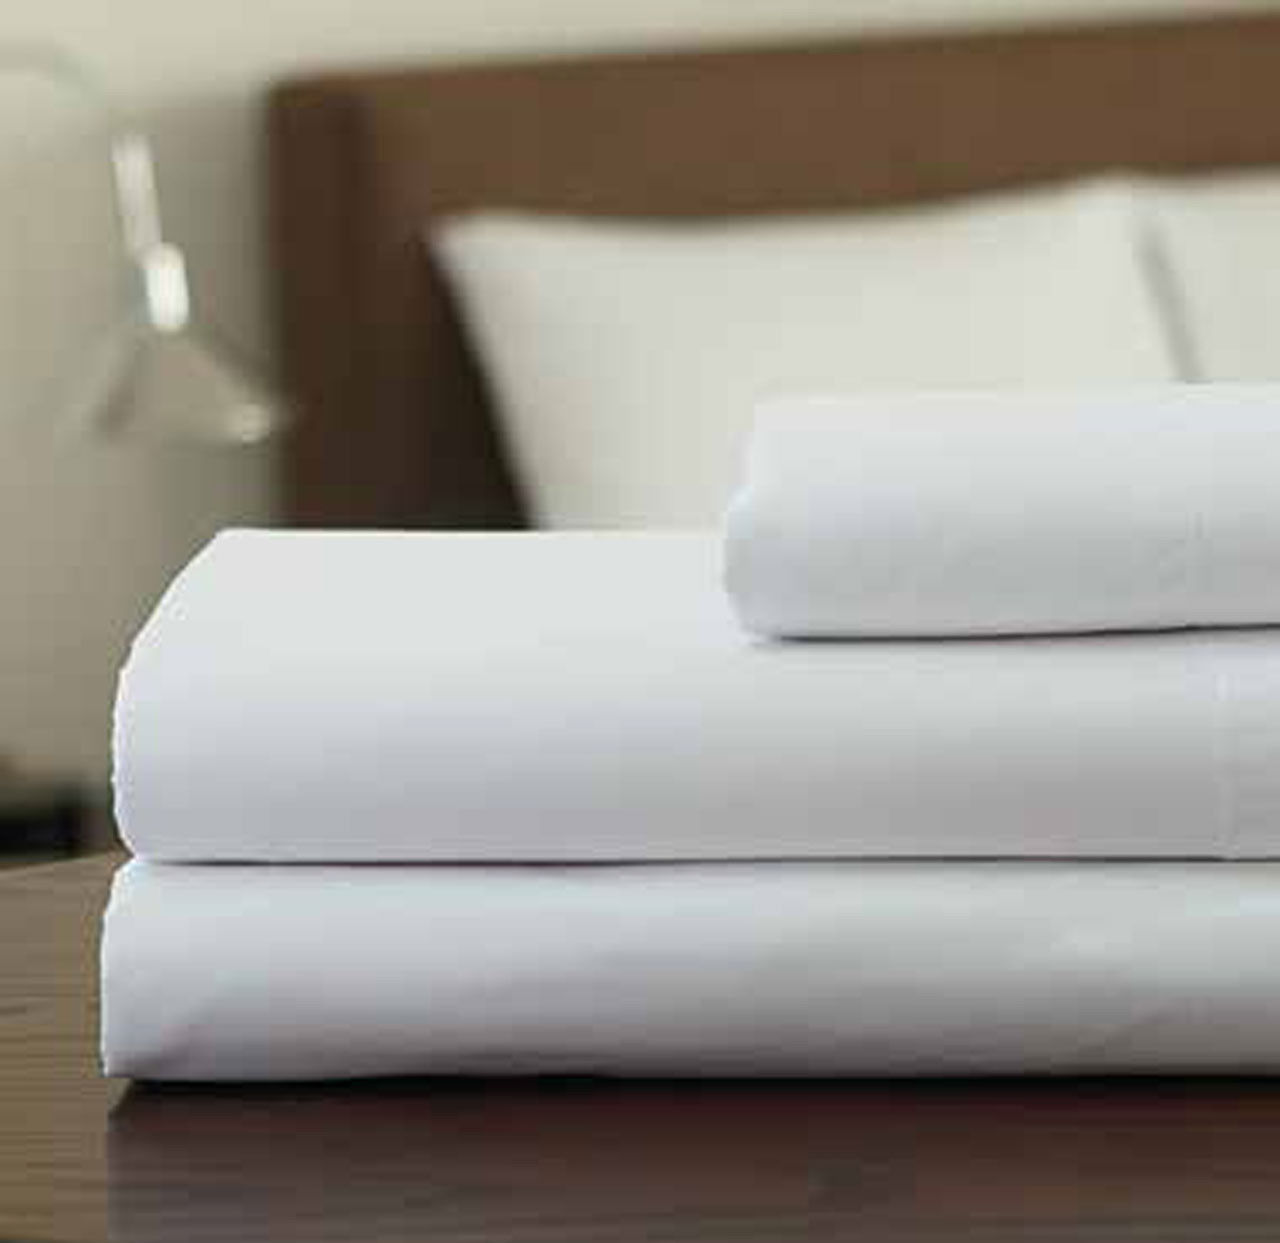 What material are the Weave Welspun sheets made of?